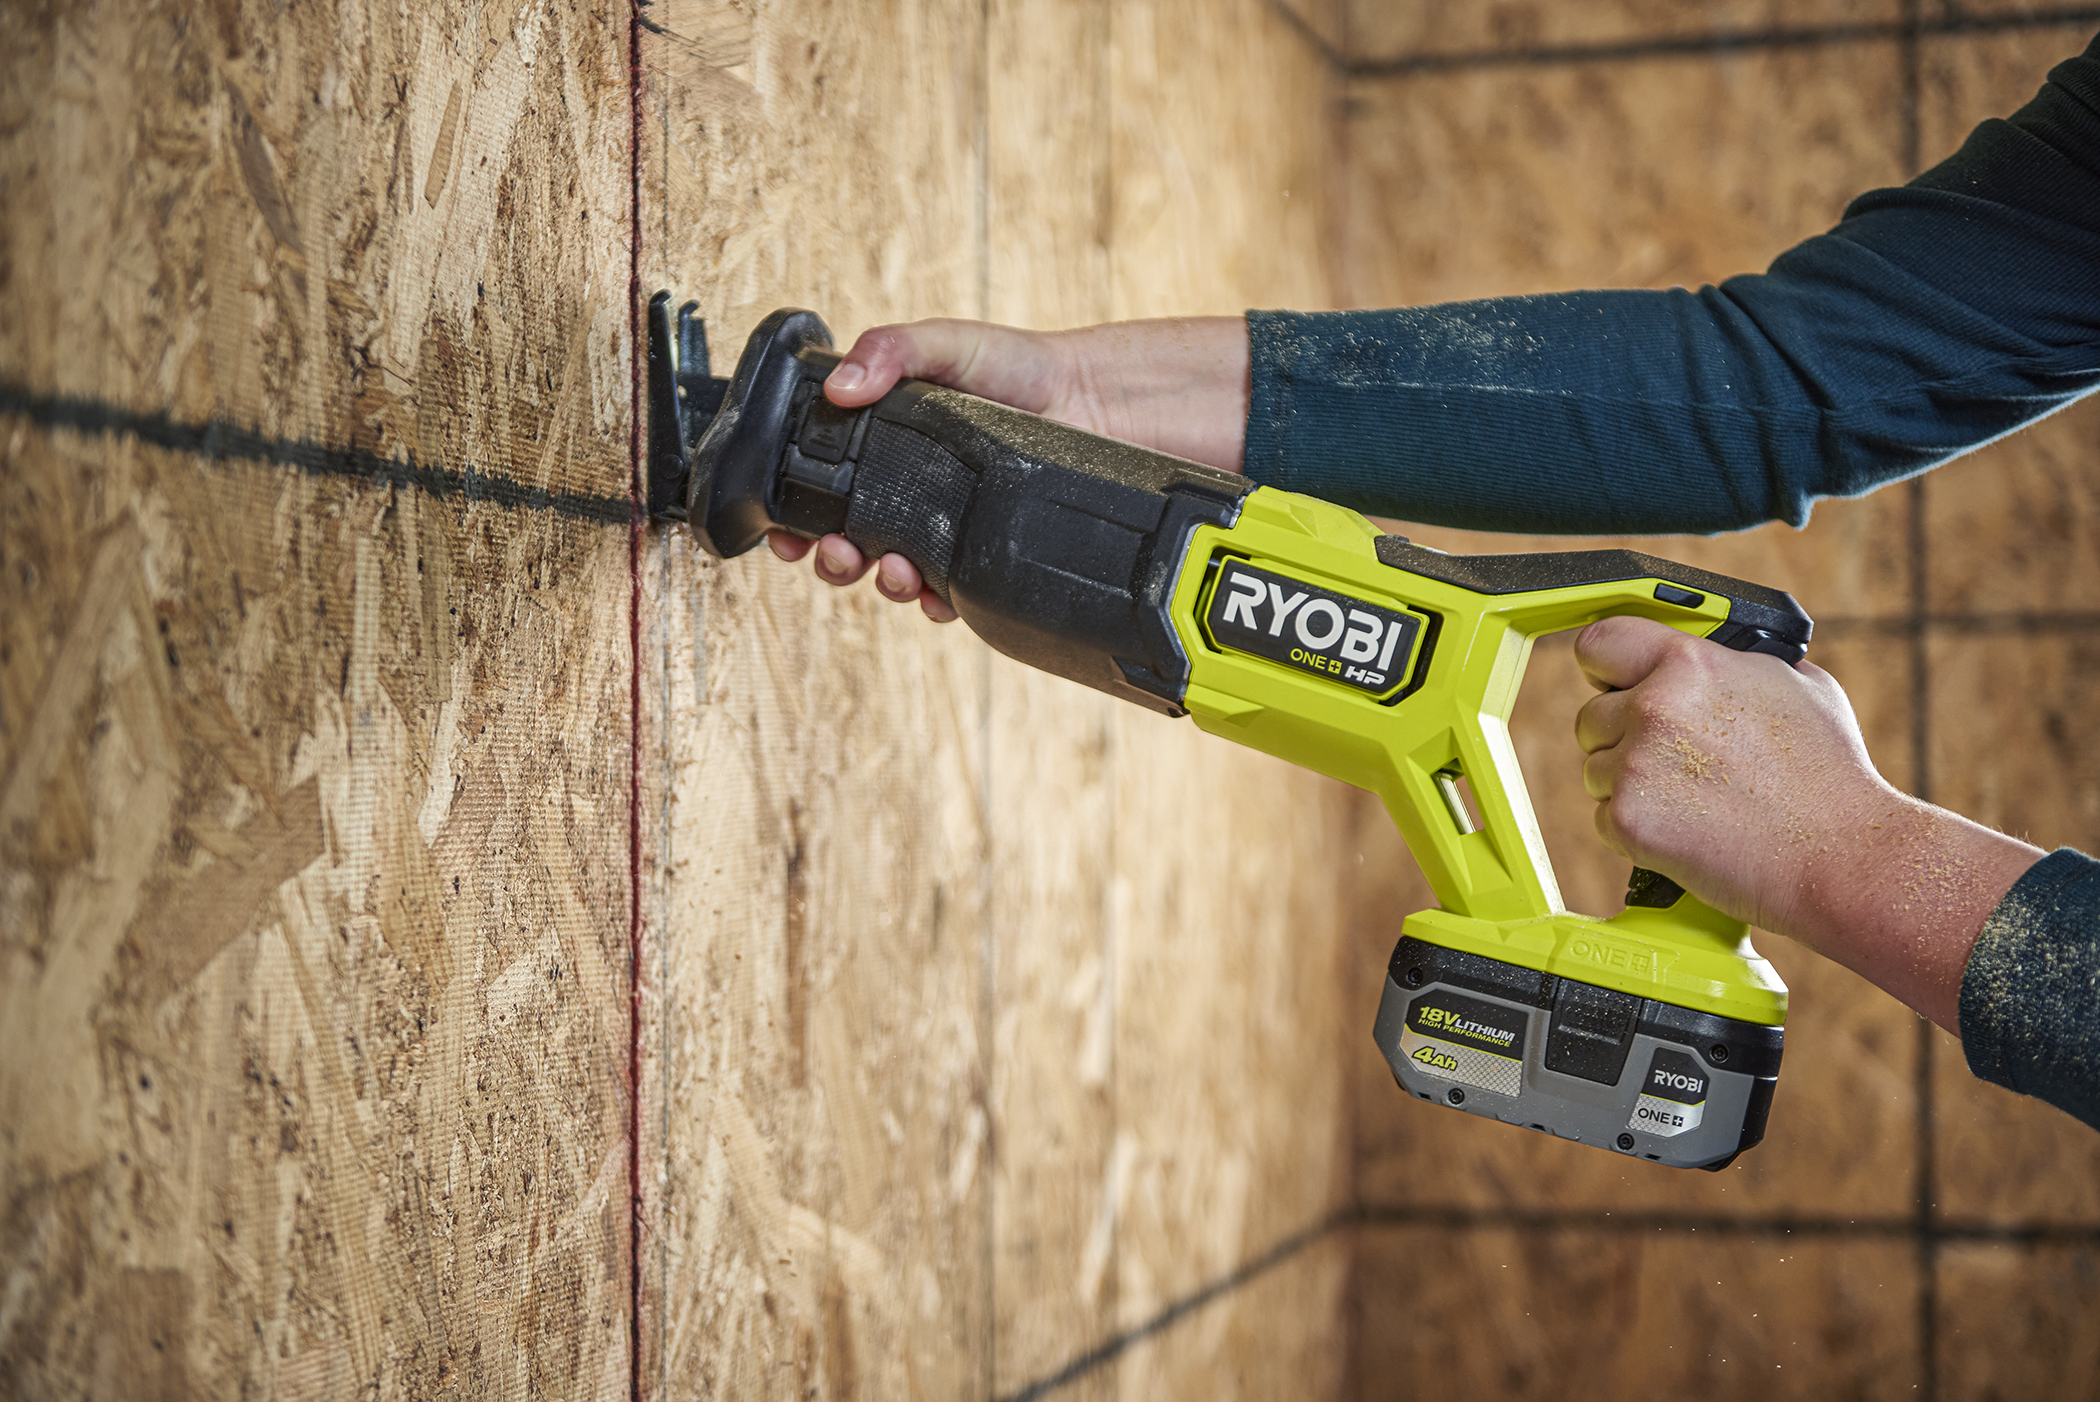 Compatible With All Corded and Cordless Reciprocating Saws